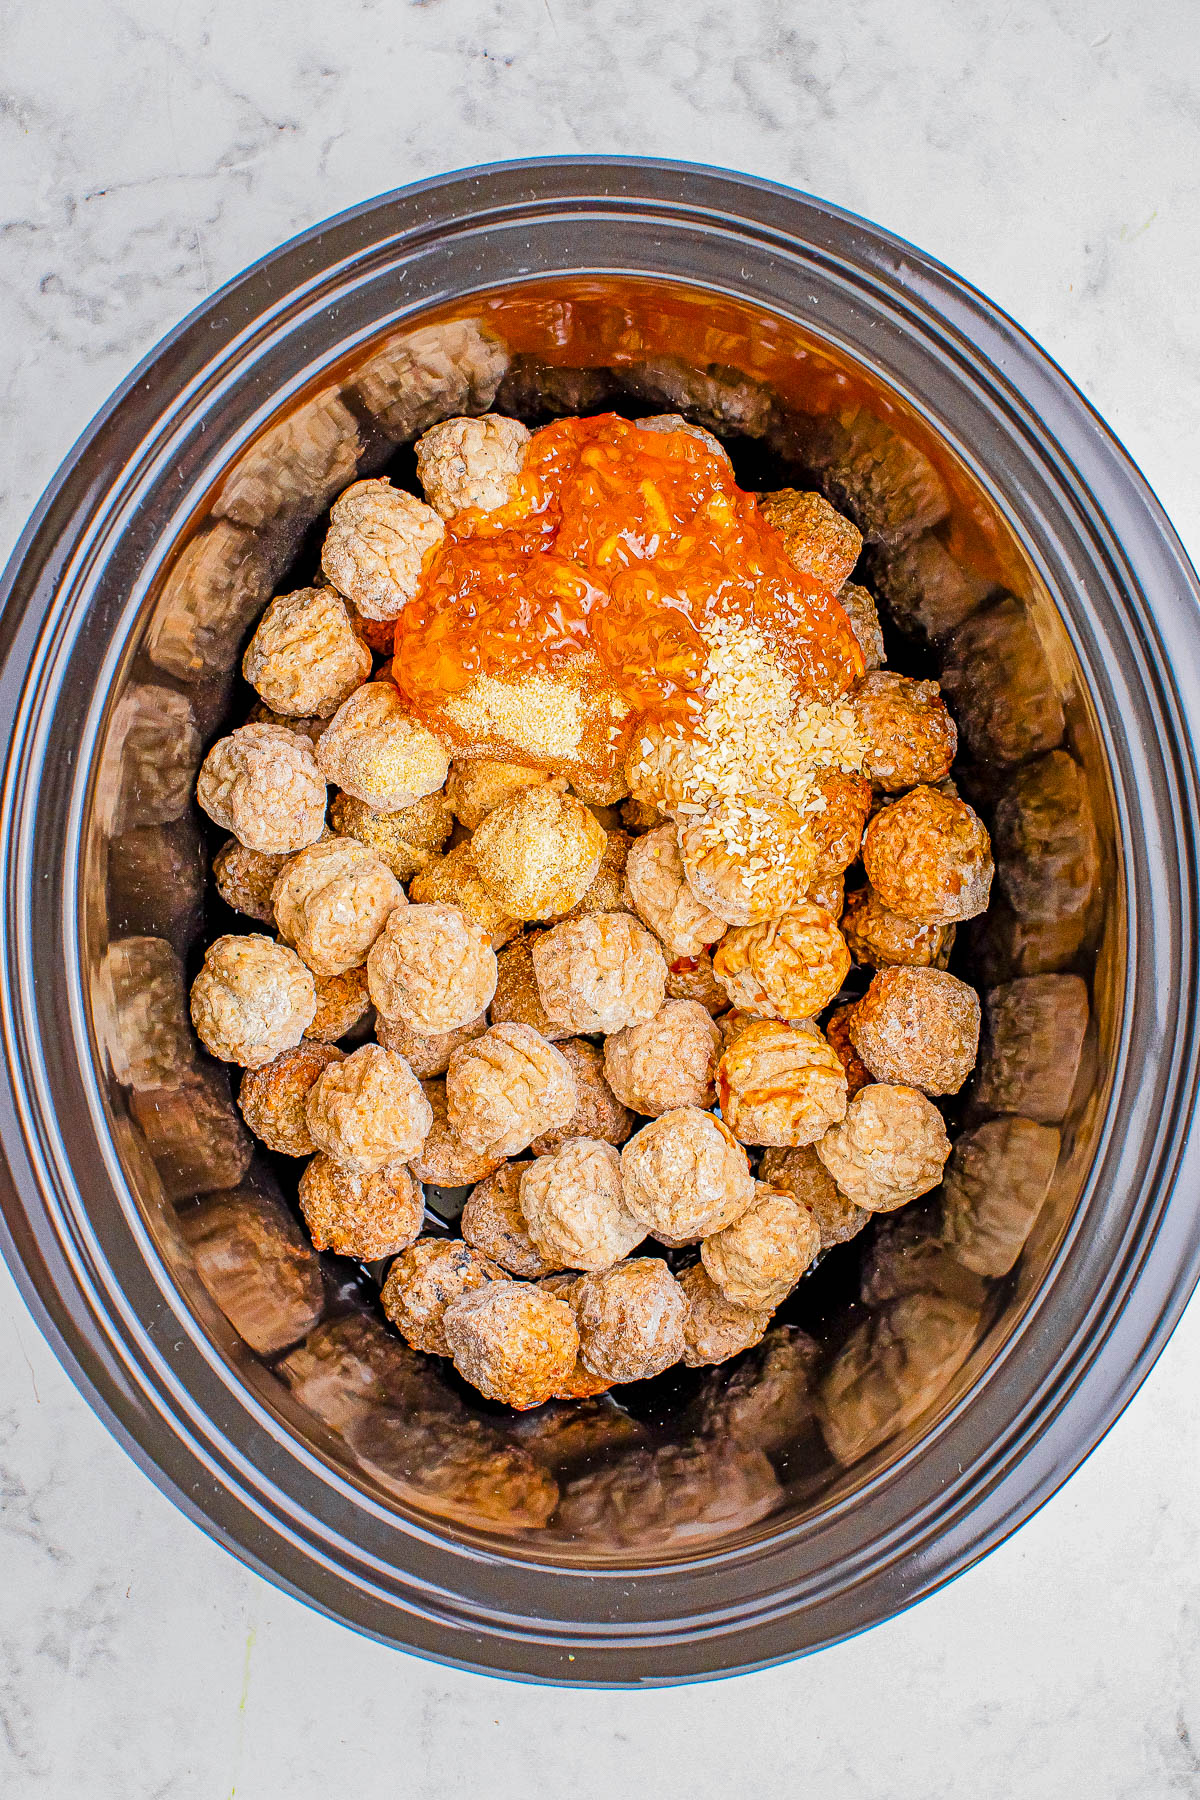 Crockpot filled with meatballs topped with sesame seeds and viewed from above.